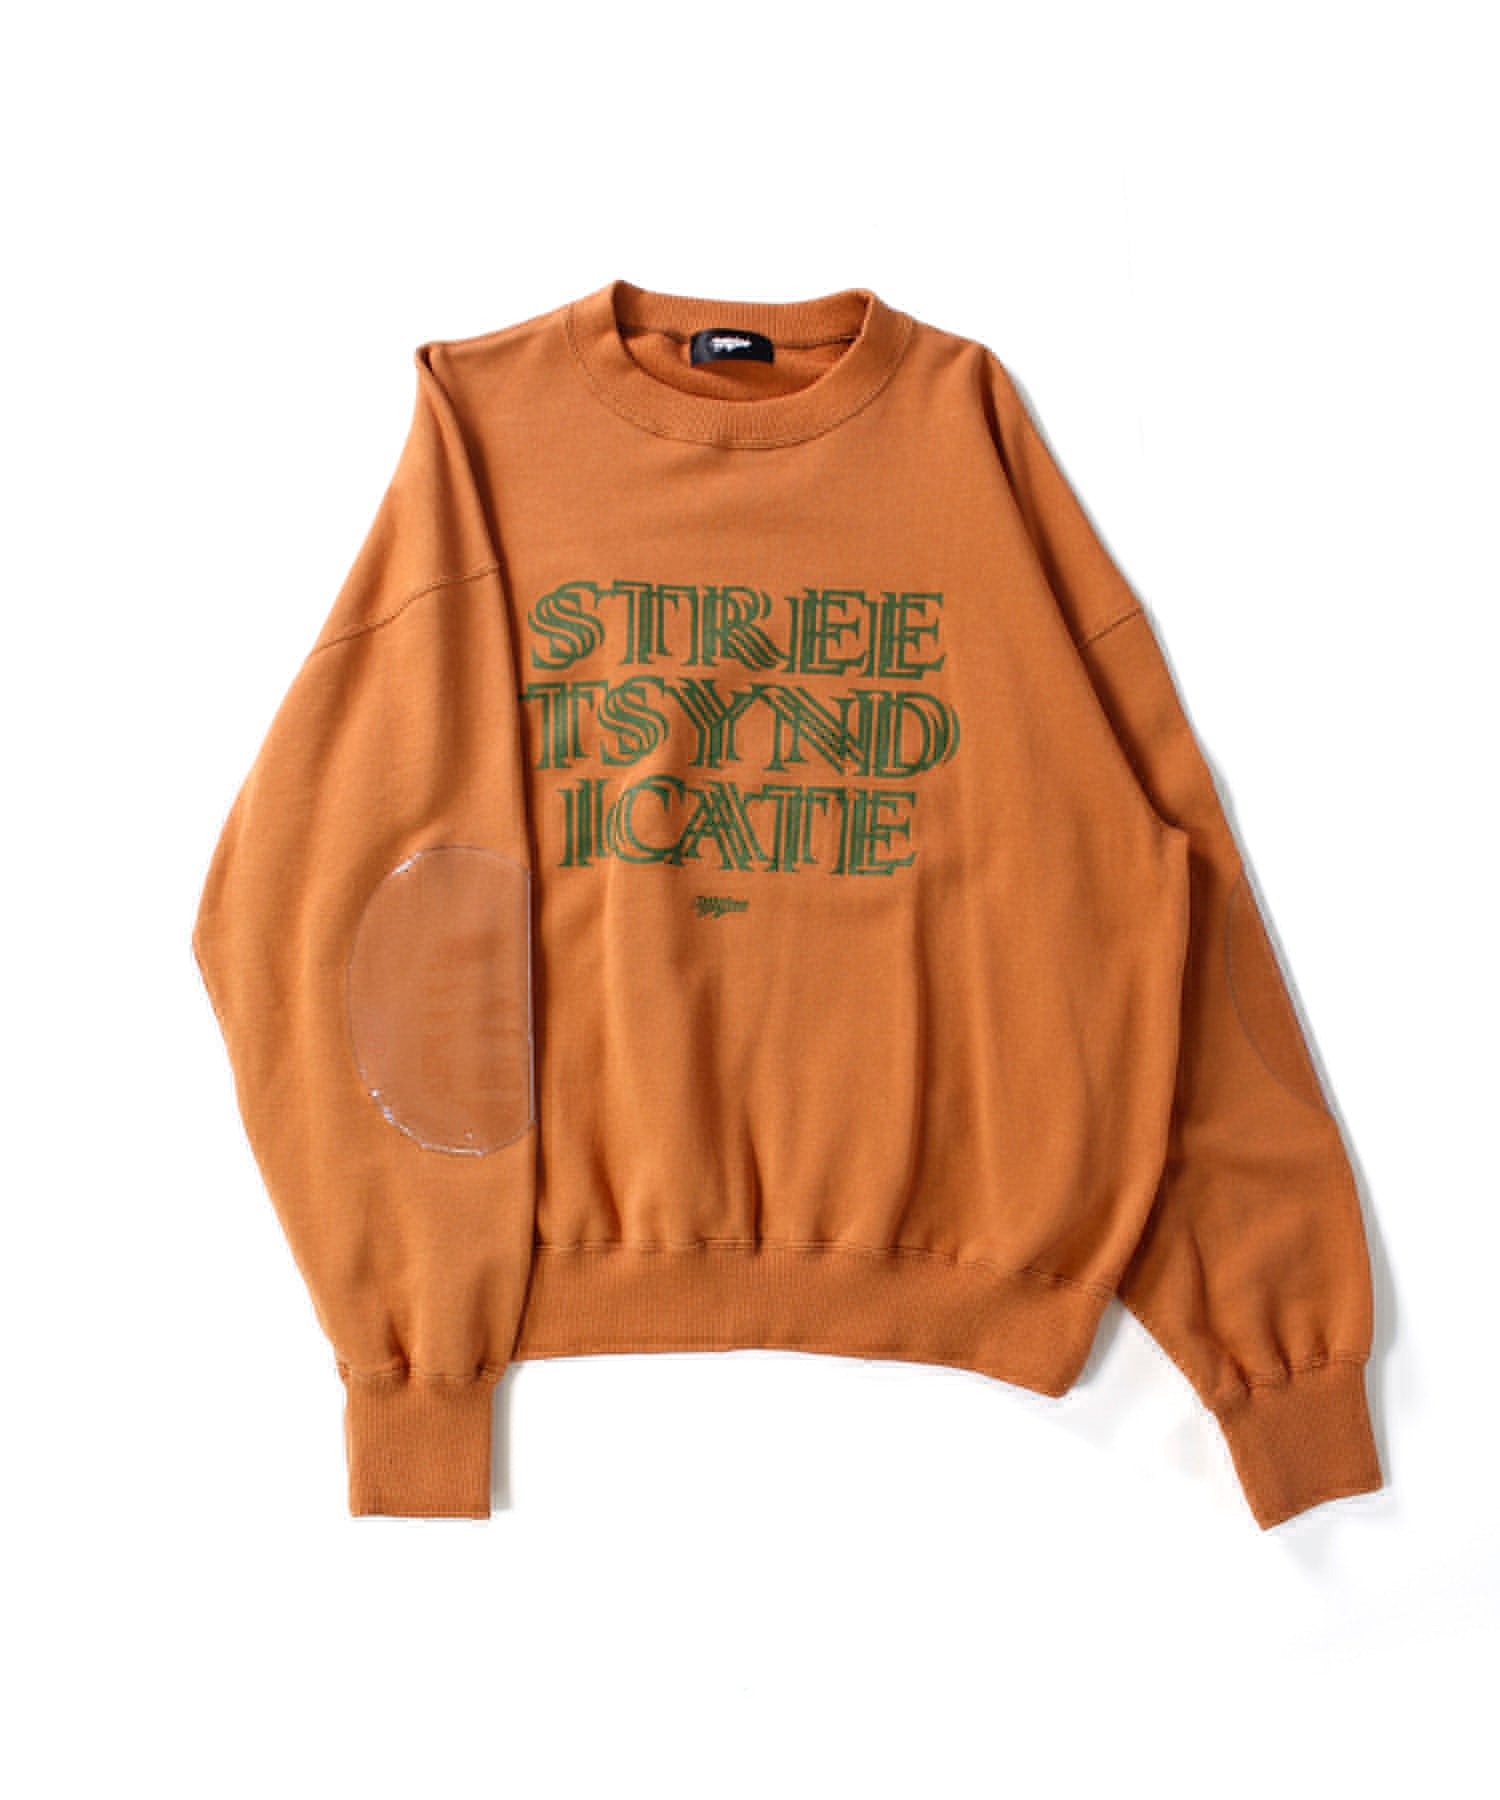 STREETSYNDICATE pullover